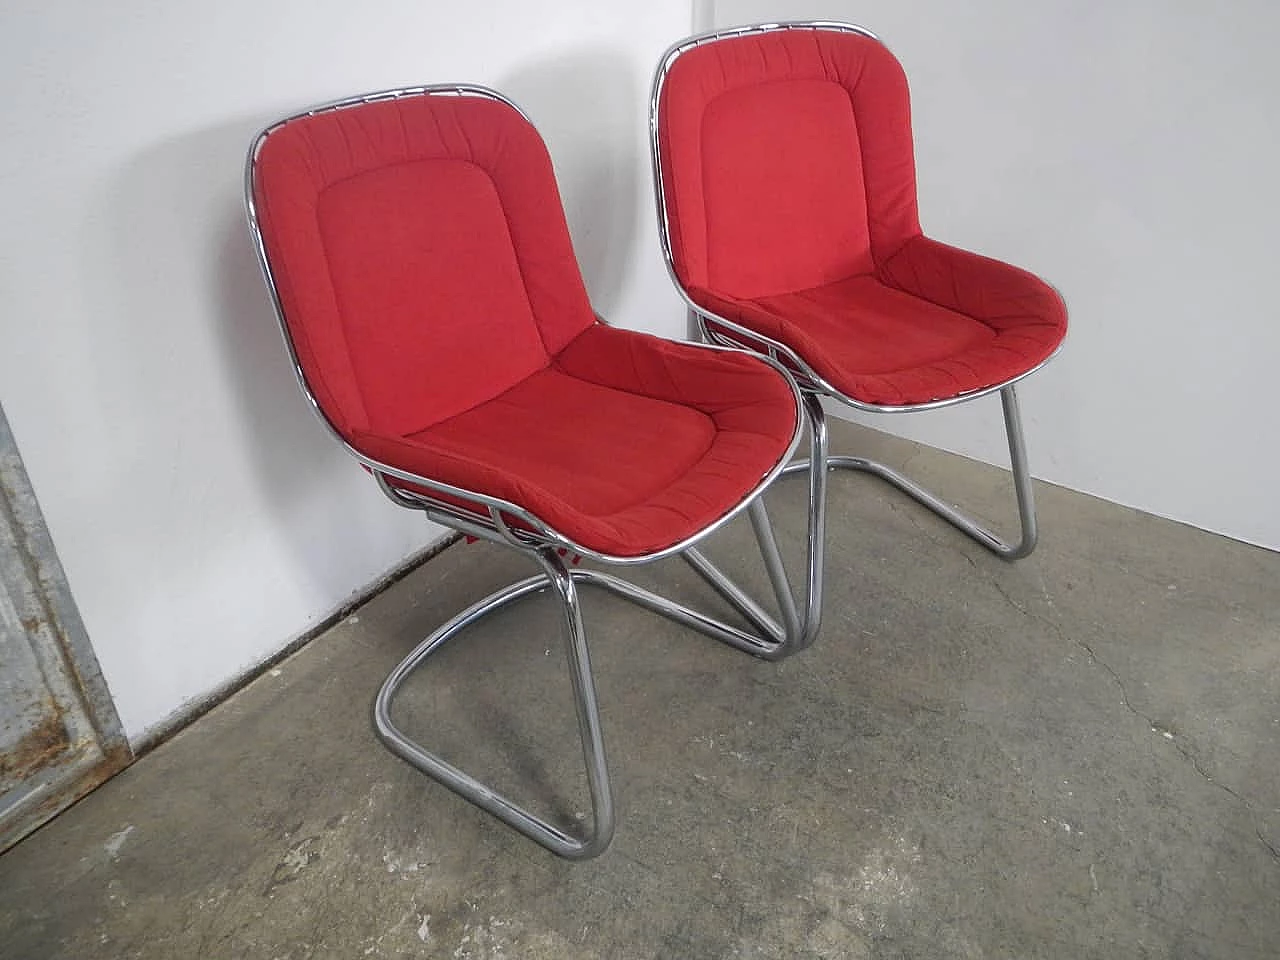 Pair of chromed metal chairs, 1970s 1345548